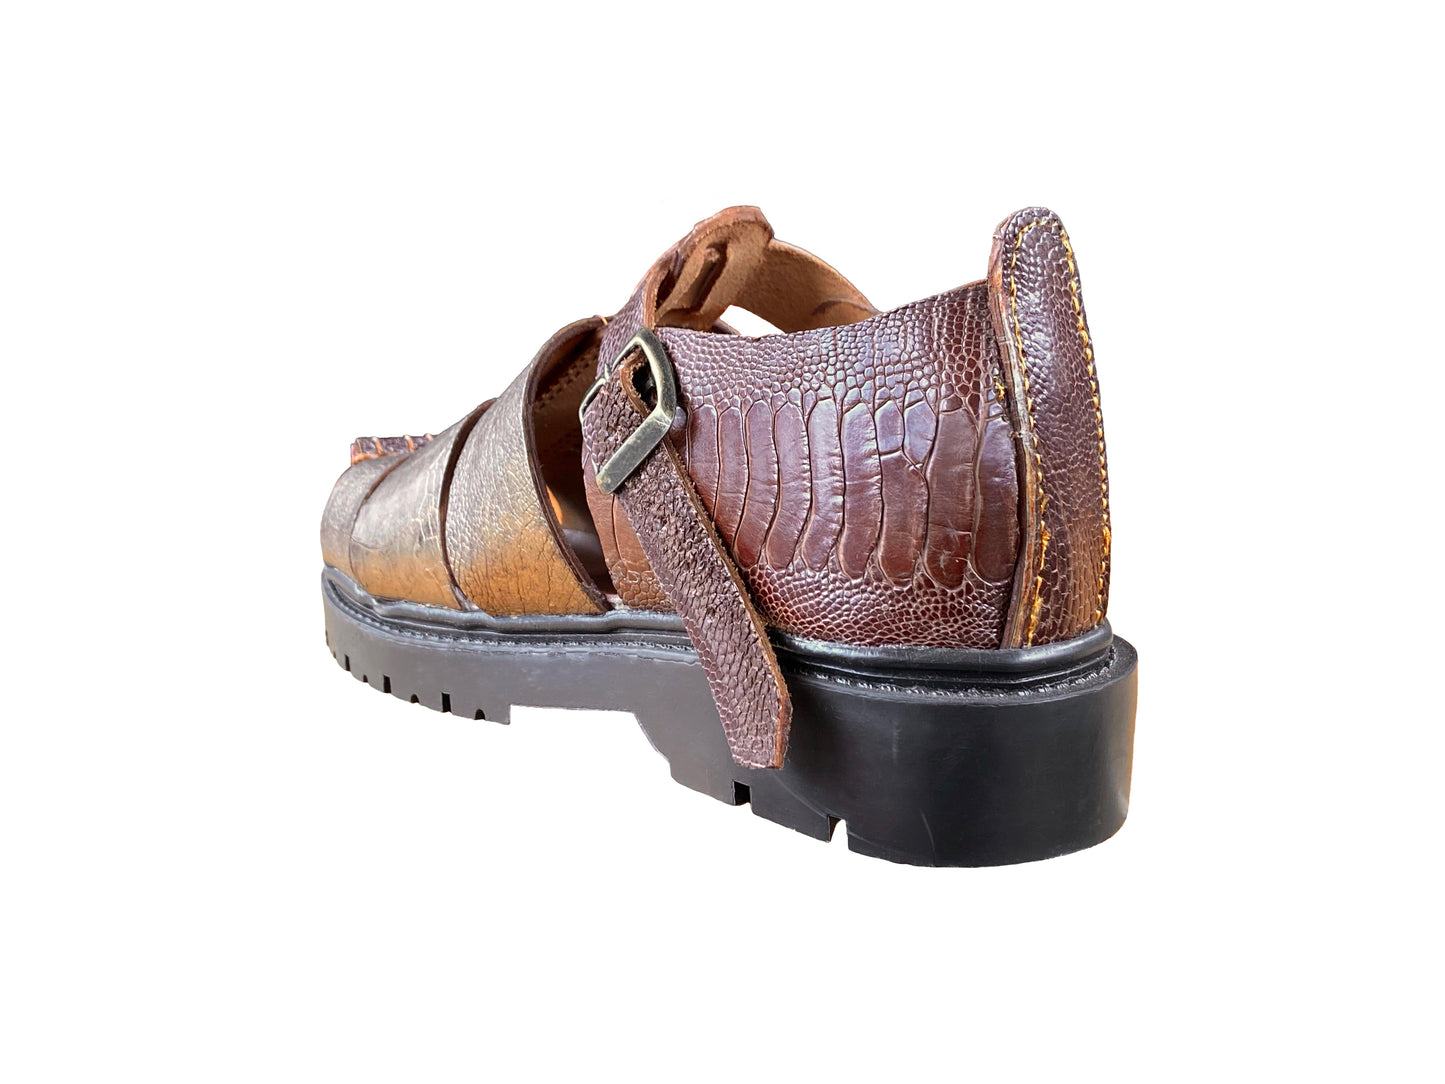 Bronze Metallic Artisanal Deadstock Ostrich Shin Crafted Shoes